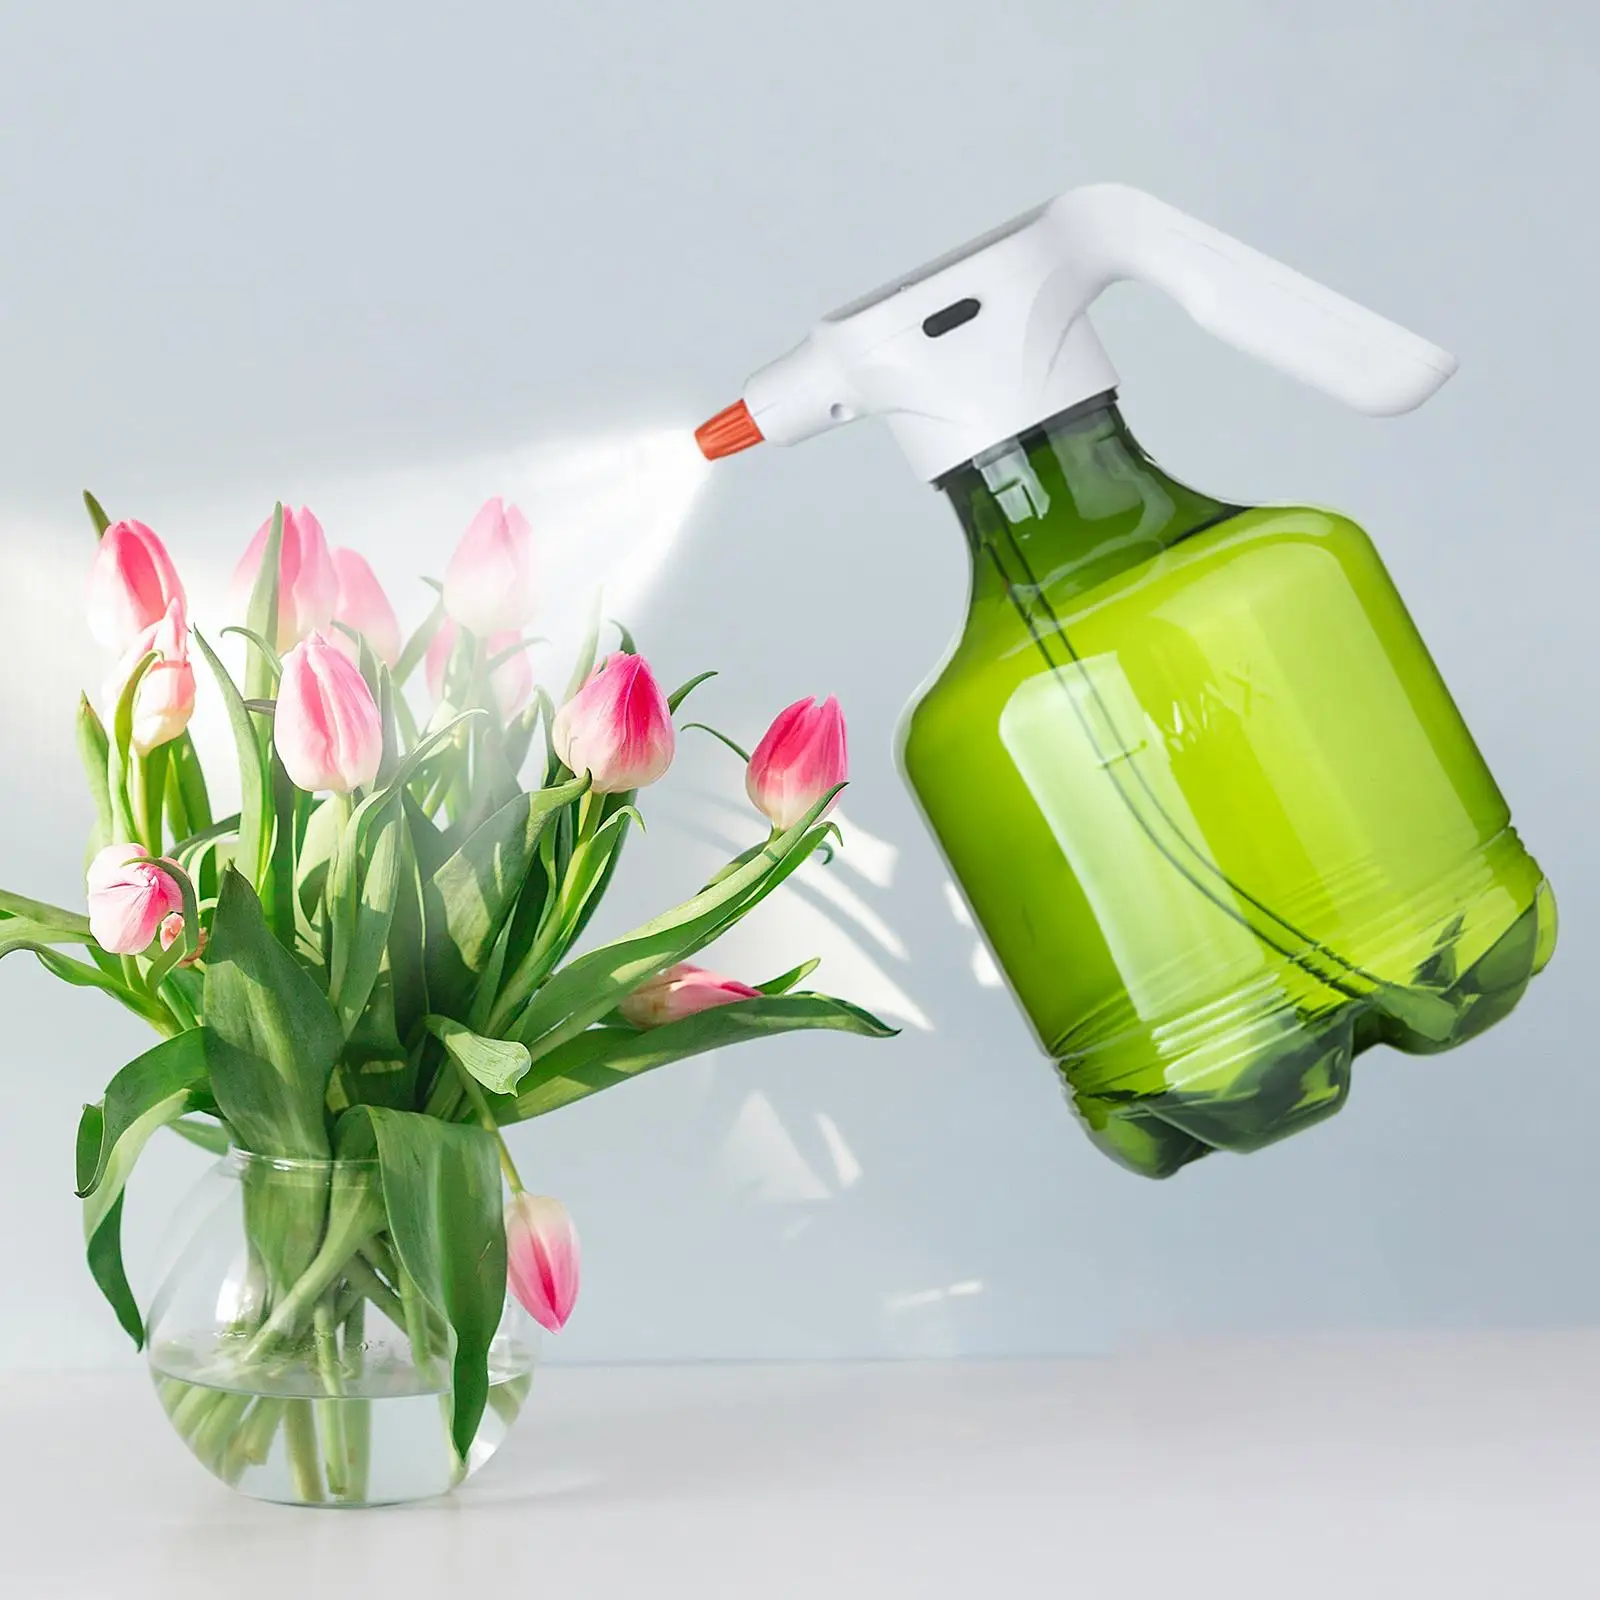 Handheld Electric Plant Mister Spray Bottle 3L Electric Watering Can Lawn Yard Indoor Outdoor Plants Cleaning Home Gardening